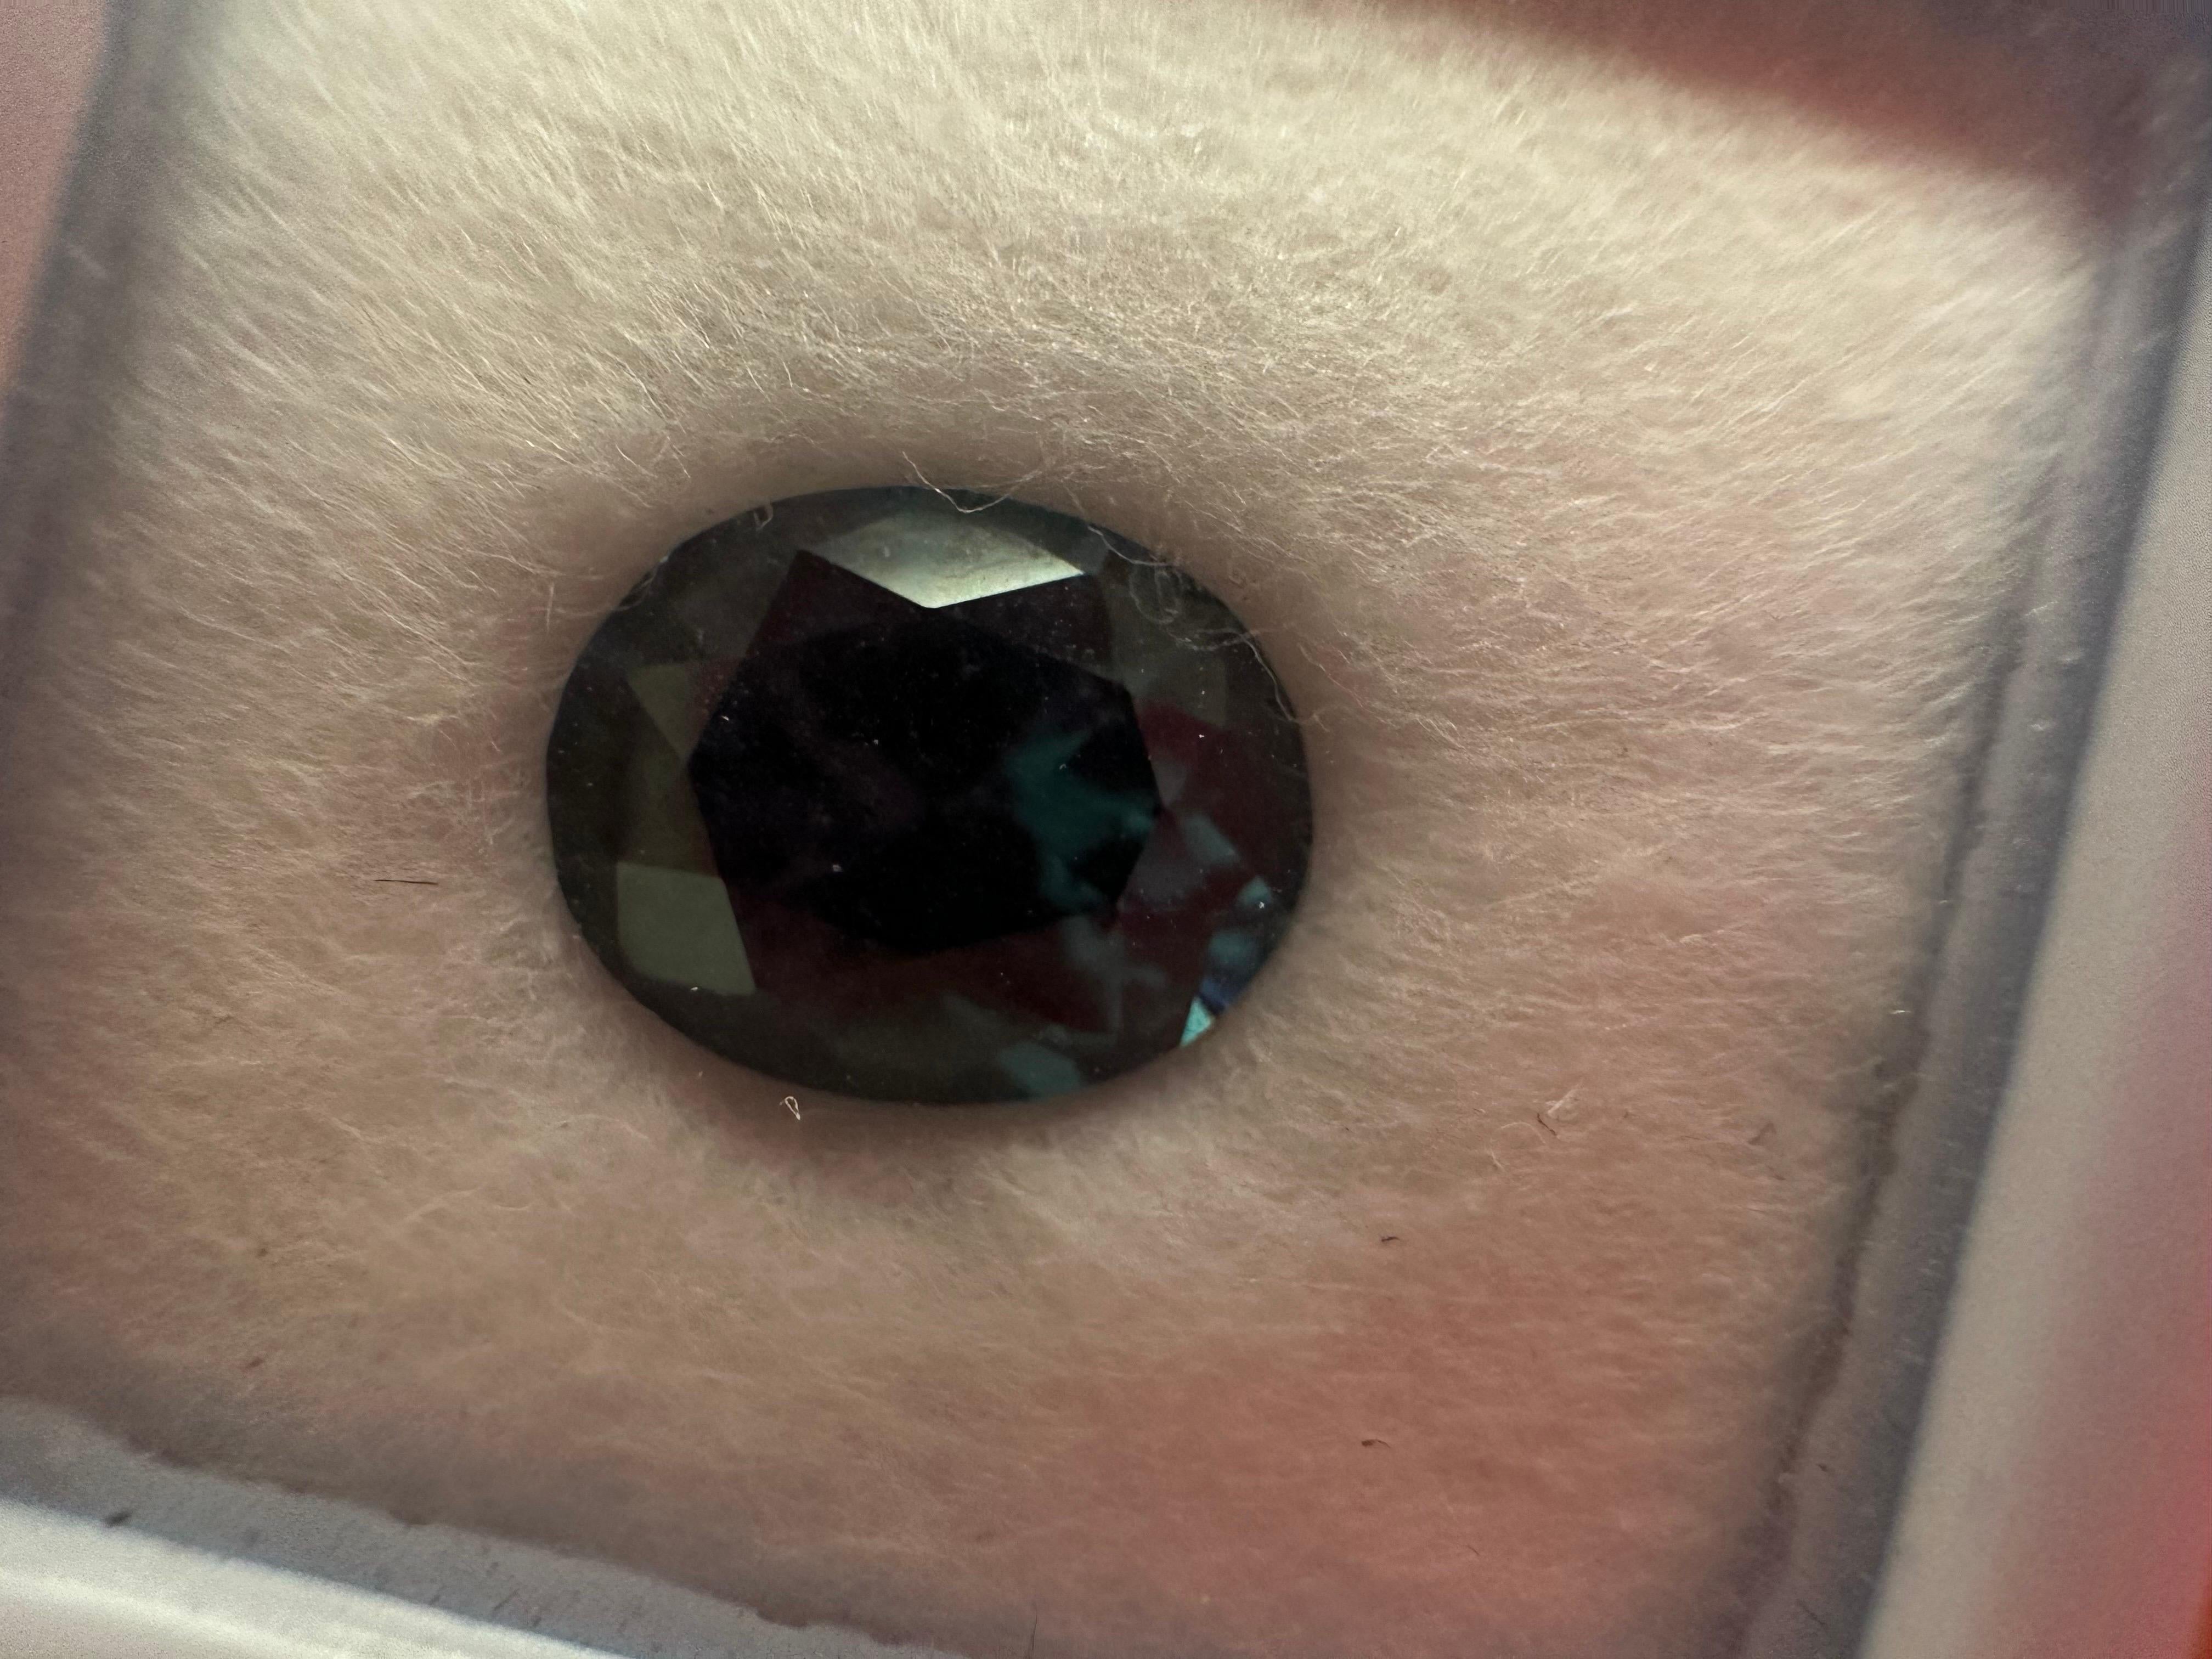 LOVELY BLUE SPINEL, WILL COME WITH A CERTIFICATE.

NATURAL GEMSTONE(S): SPINEL
Clarity/Color: Slightly Included/Blue
Cut: Rectangular 9.4mm x 7.5mm
Carat: 2.40ct
Treatment: none


WHAT YOU GET AT STAMPAR JEWELERS:
Stampar Jewelers, located in the